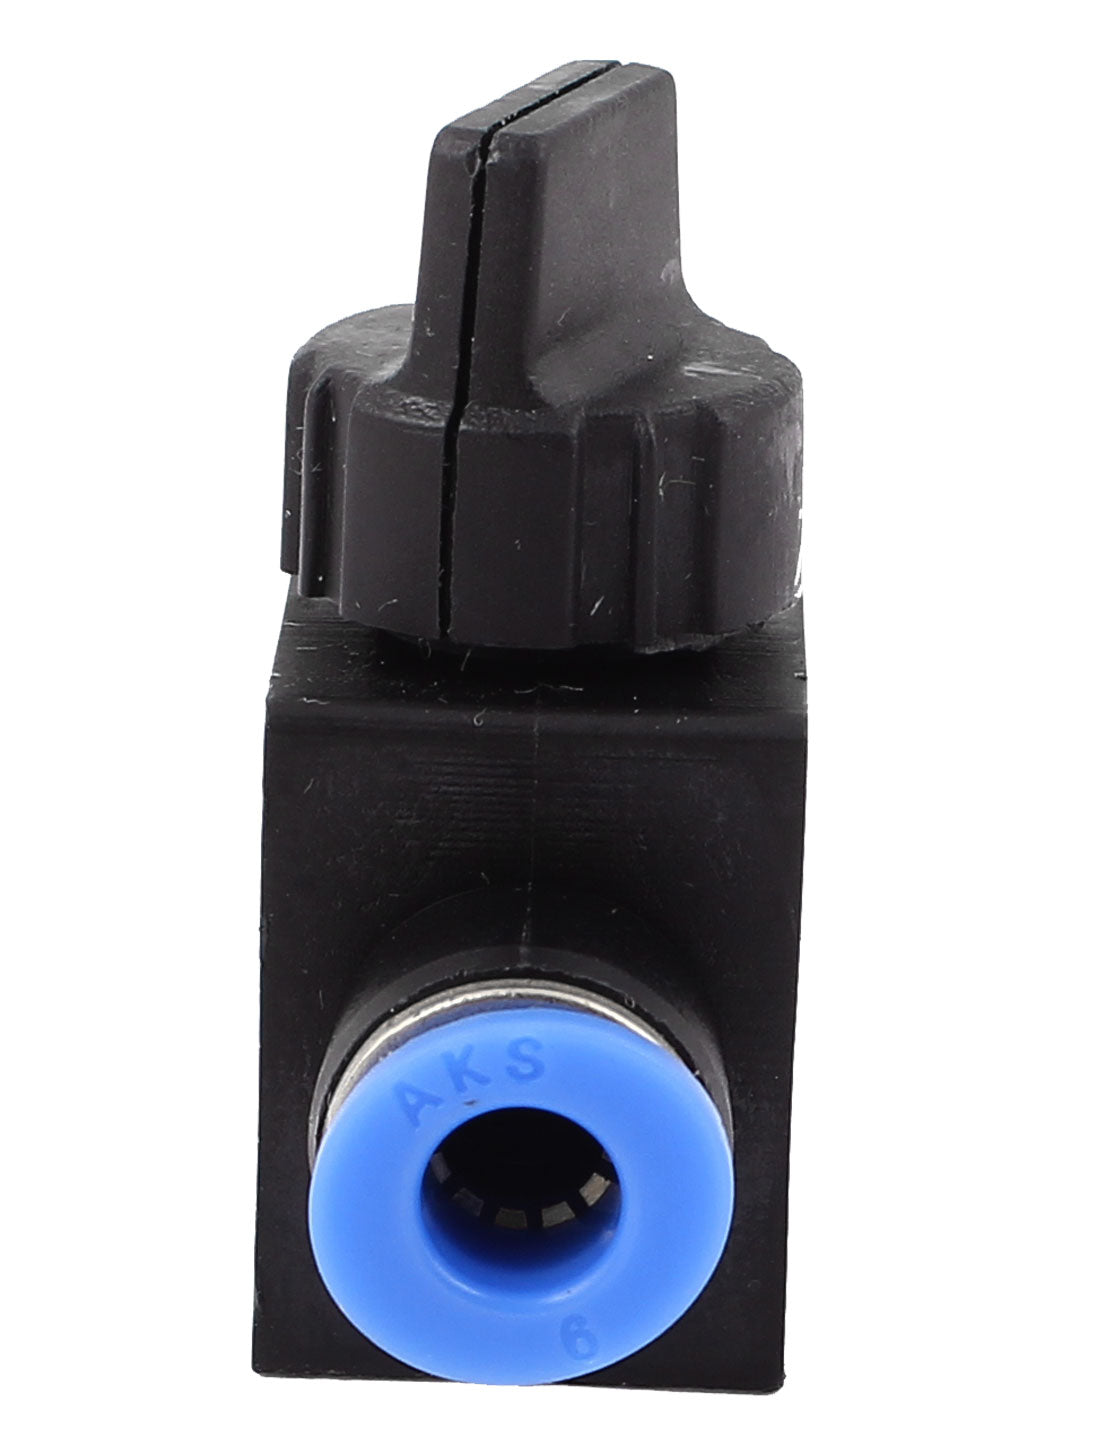 uxcell Uxcell 6mm to 6mm Air Pneumatic Quick Release Fitting Connector Speed Controller Valve